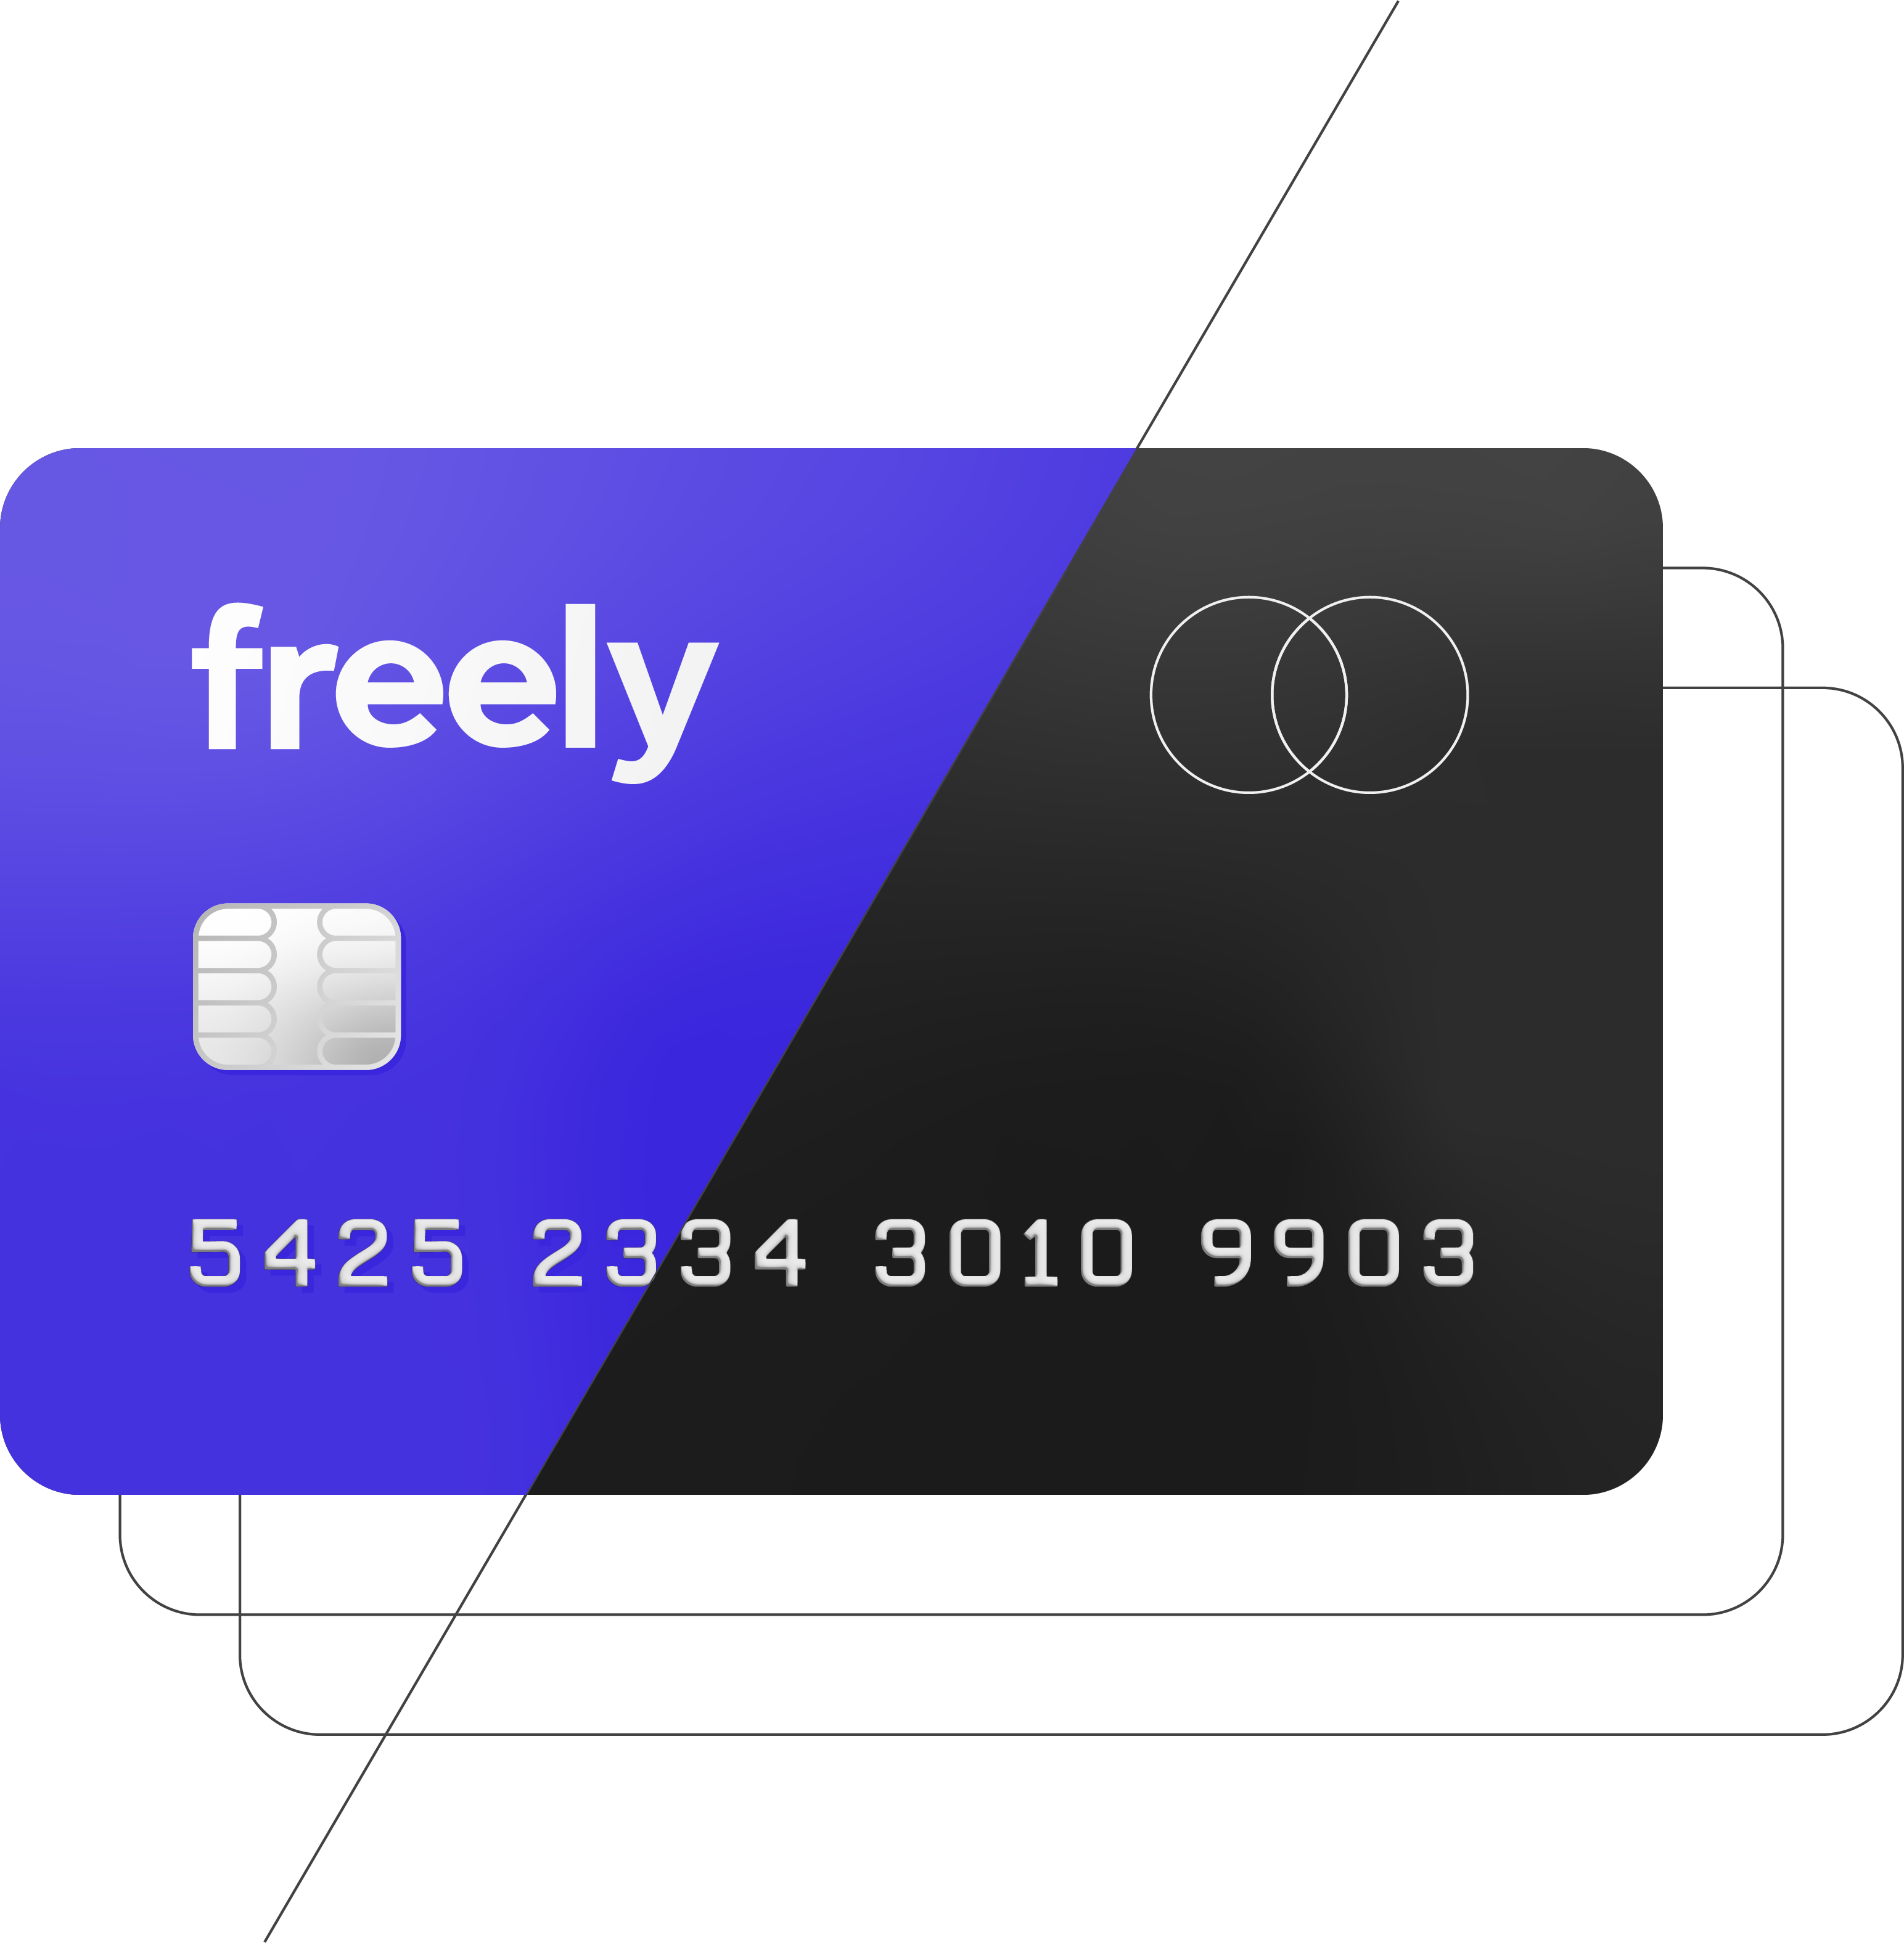 Freely_Icons_HowItWorks_GetMorewithFreelyPay_R3.0_021224